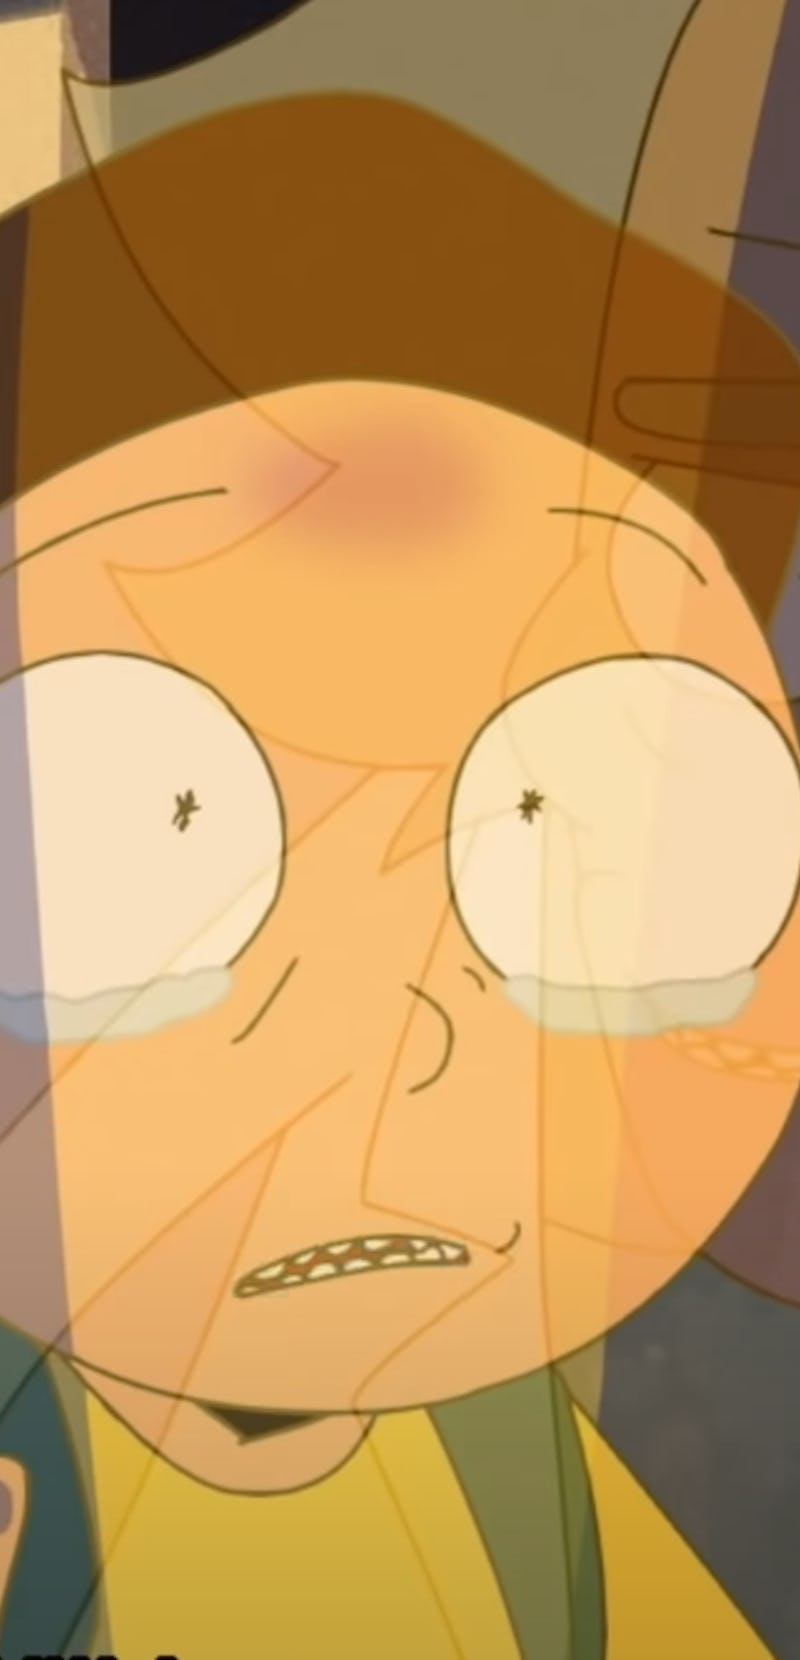 Rick and Morty overlapping images in the new Rick and Morty short episode